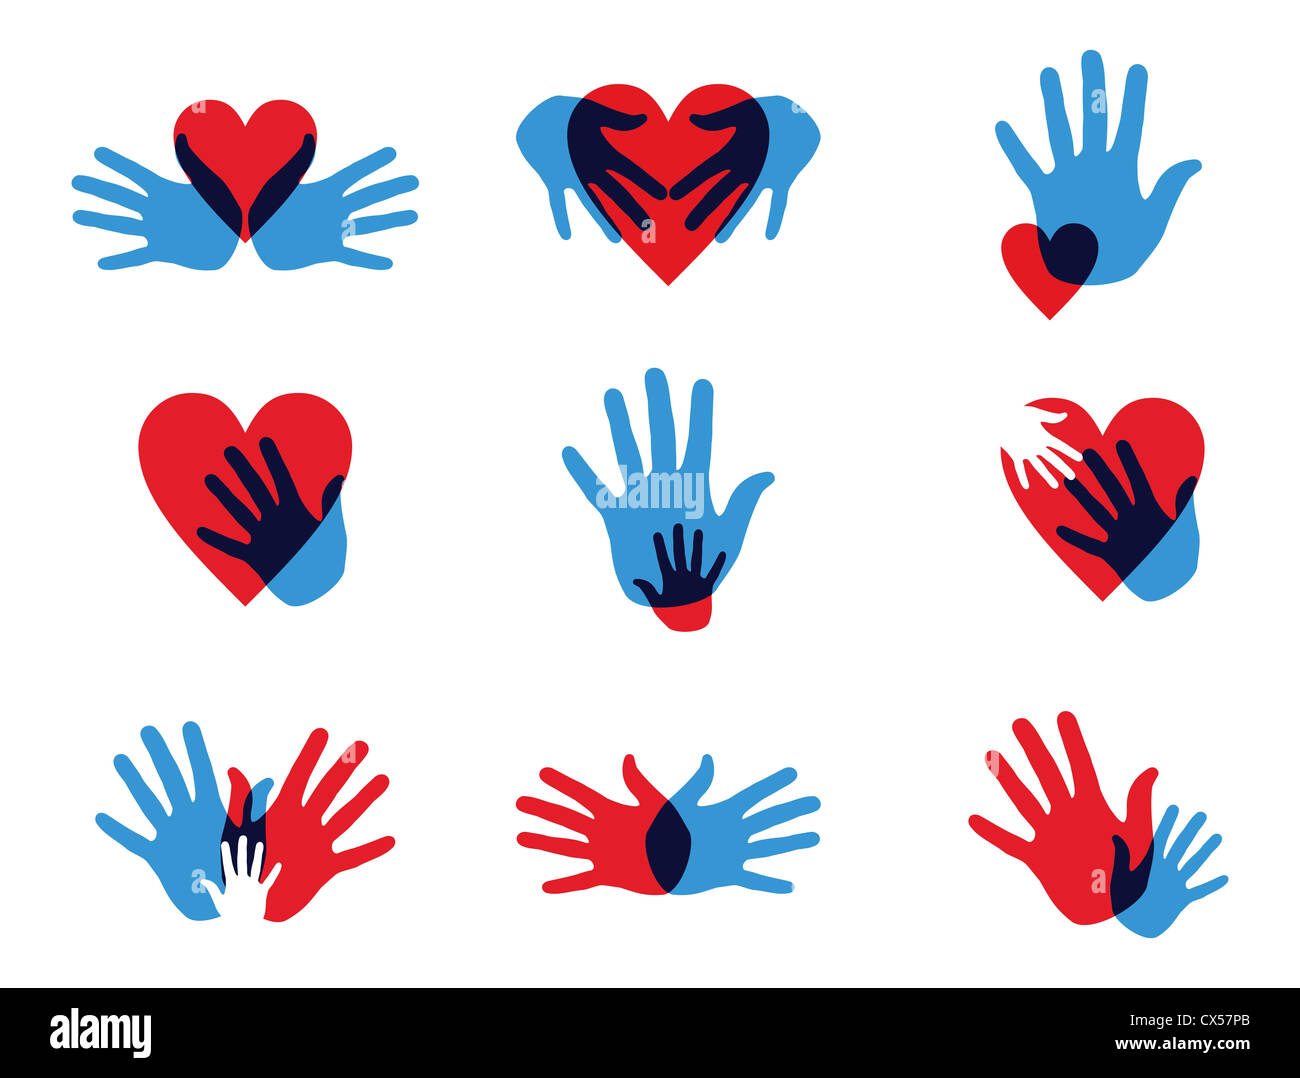 Multicolor creative diversity hands icon set. Vector illustration layered for easy manipulation and custom coloring. Stock Photo